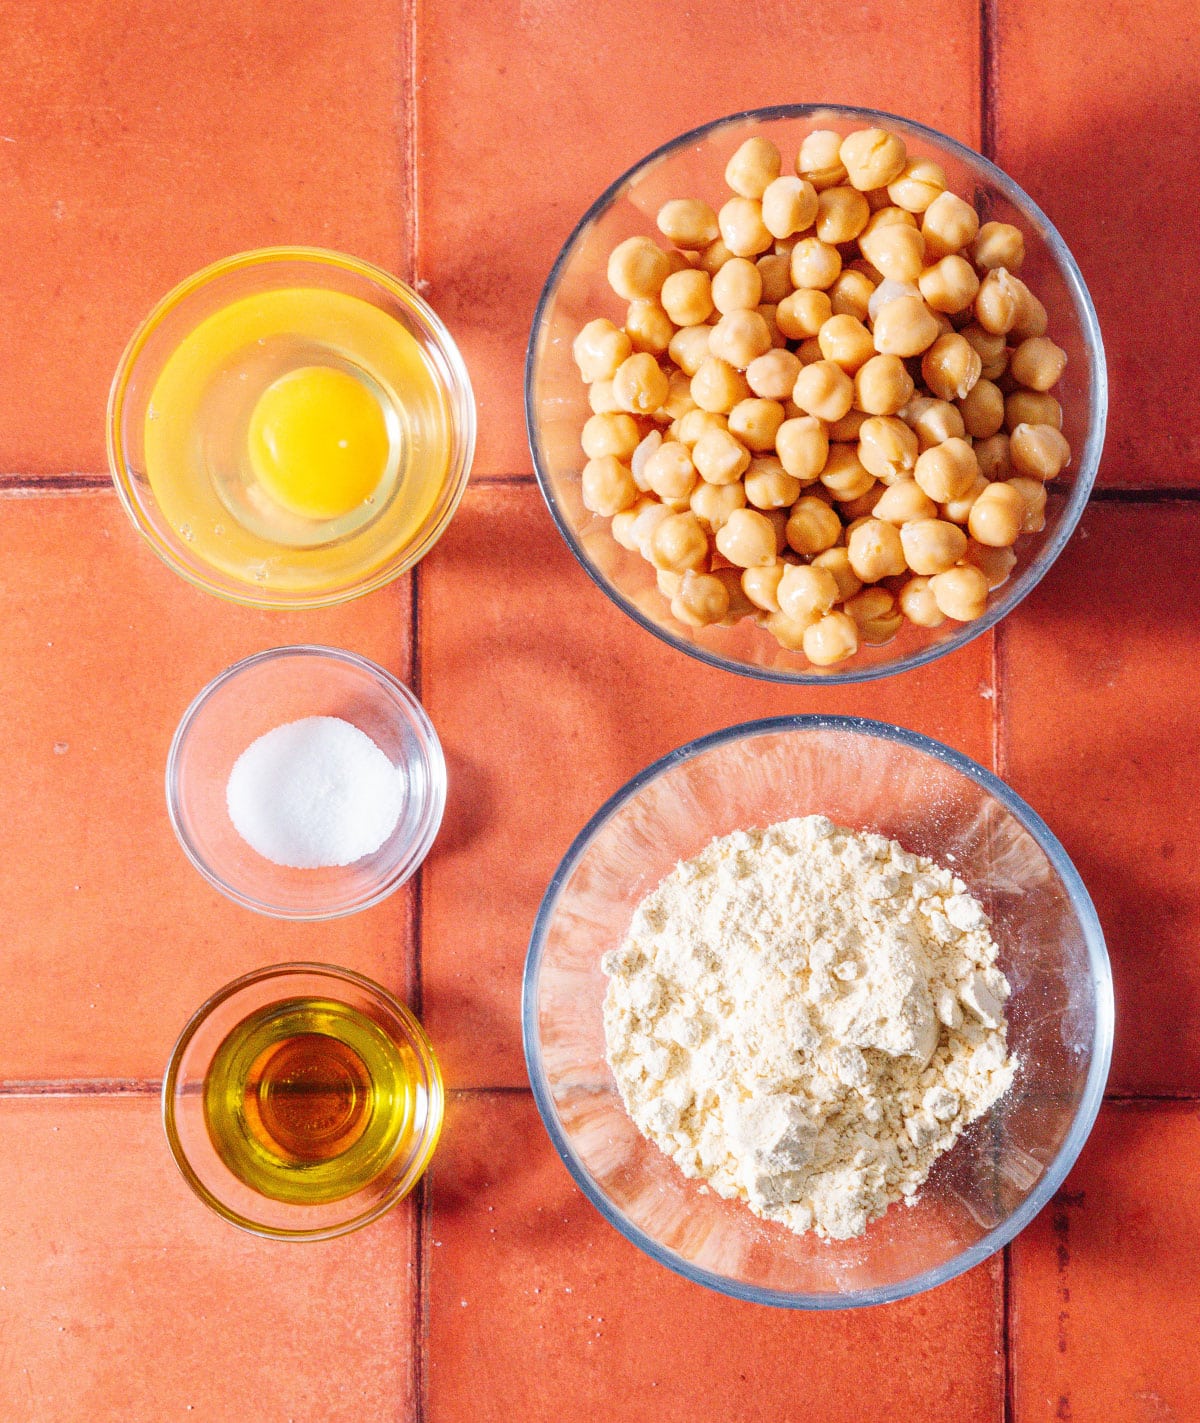 Ingredients to make chickpea pizza crust.